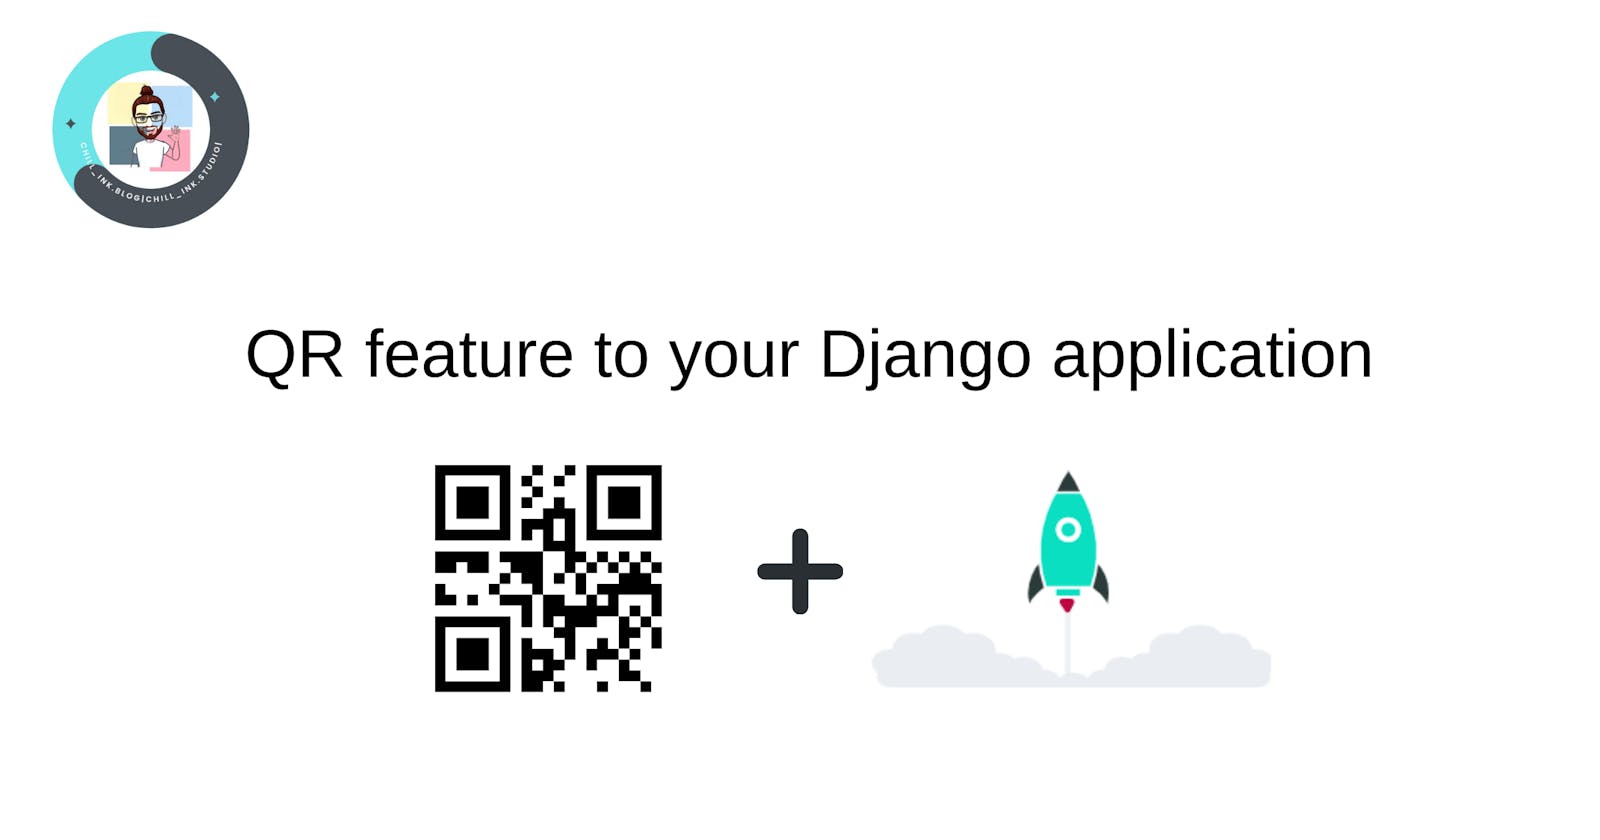 Let's add QR feature for our Django application!